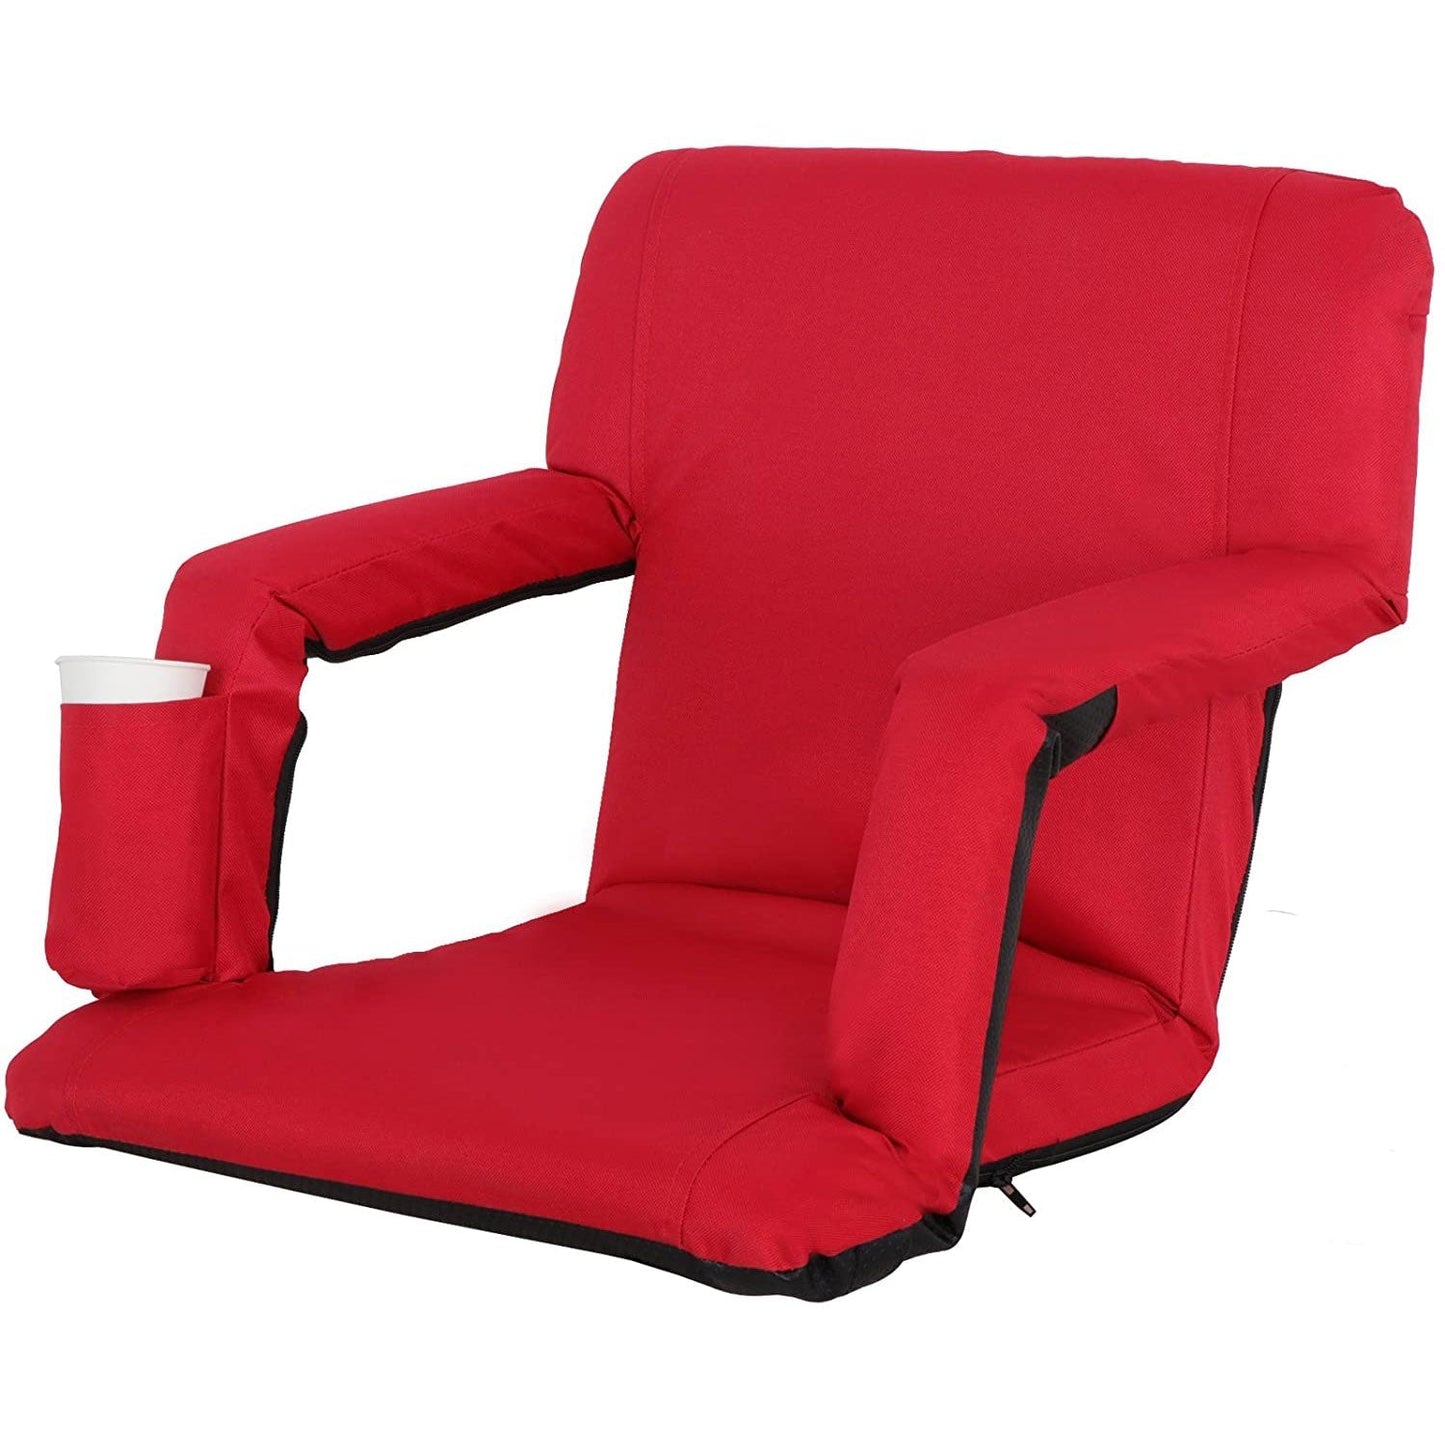 Portable Stadium Seat Chair Red